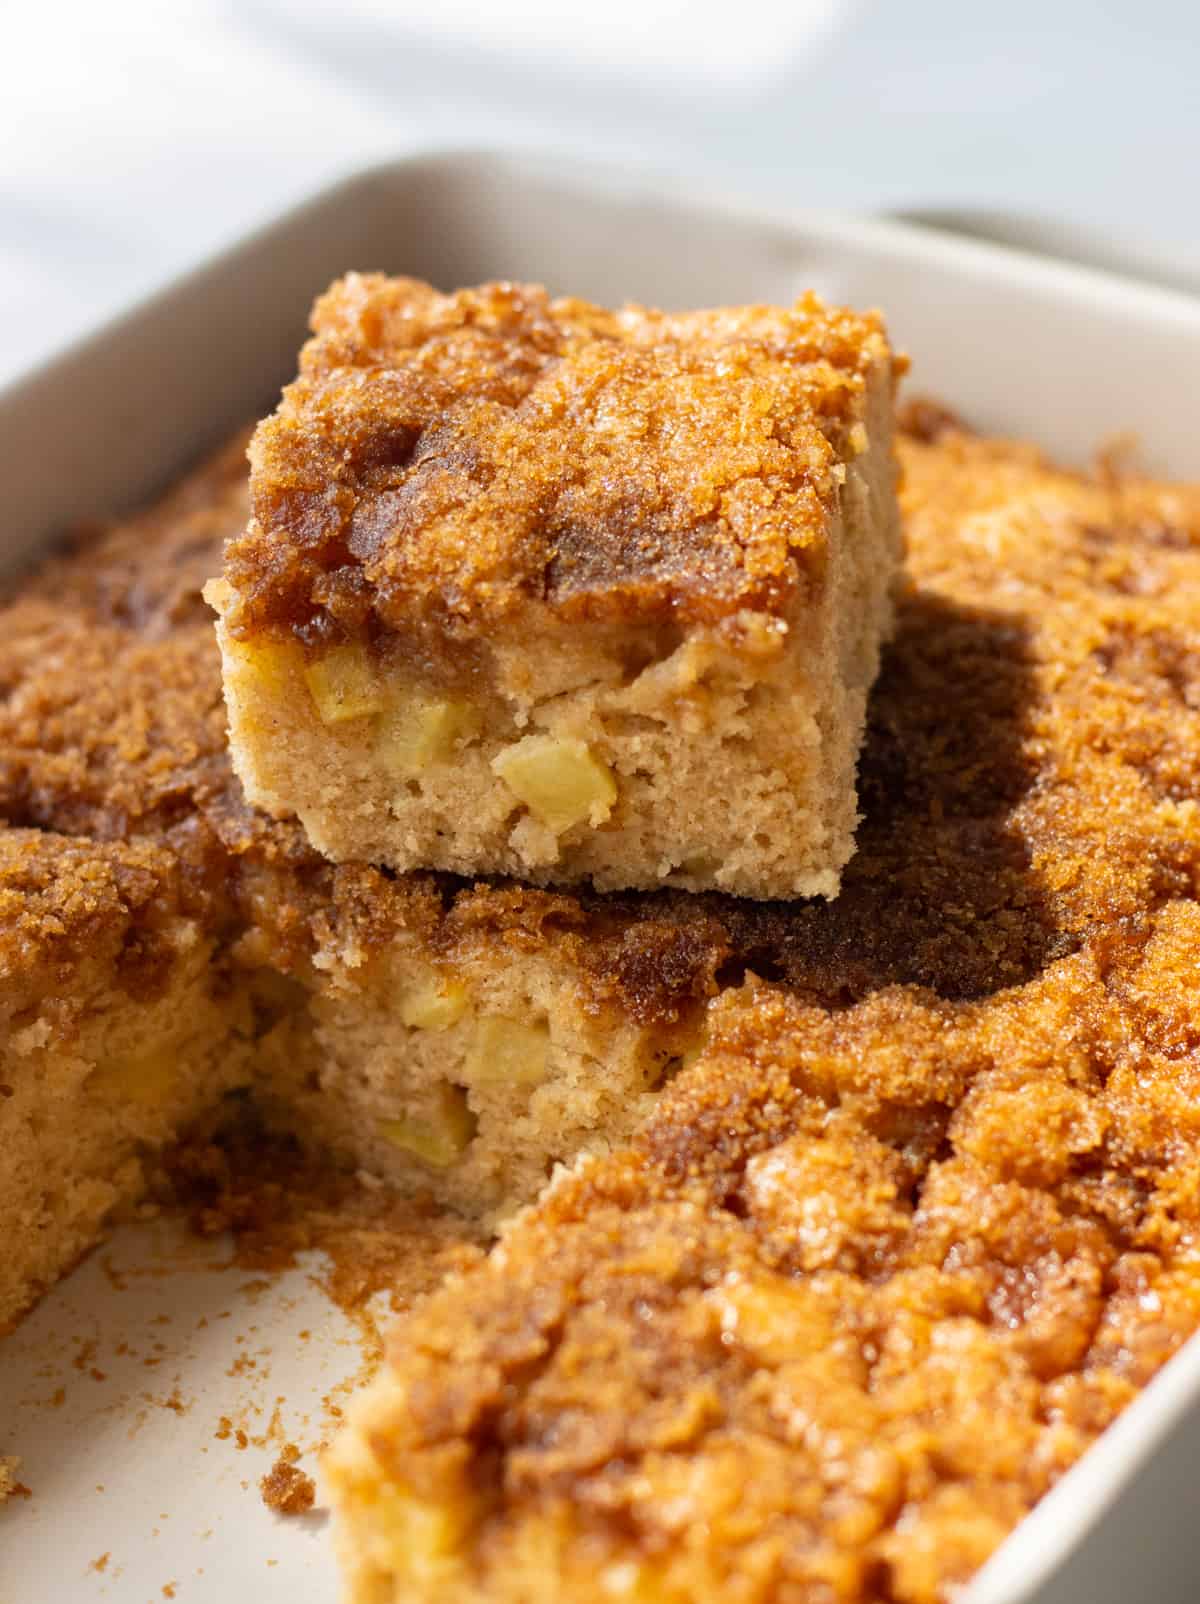 Cinnamon apple cake sliced up in a baking dish with one slice stacked on another.